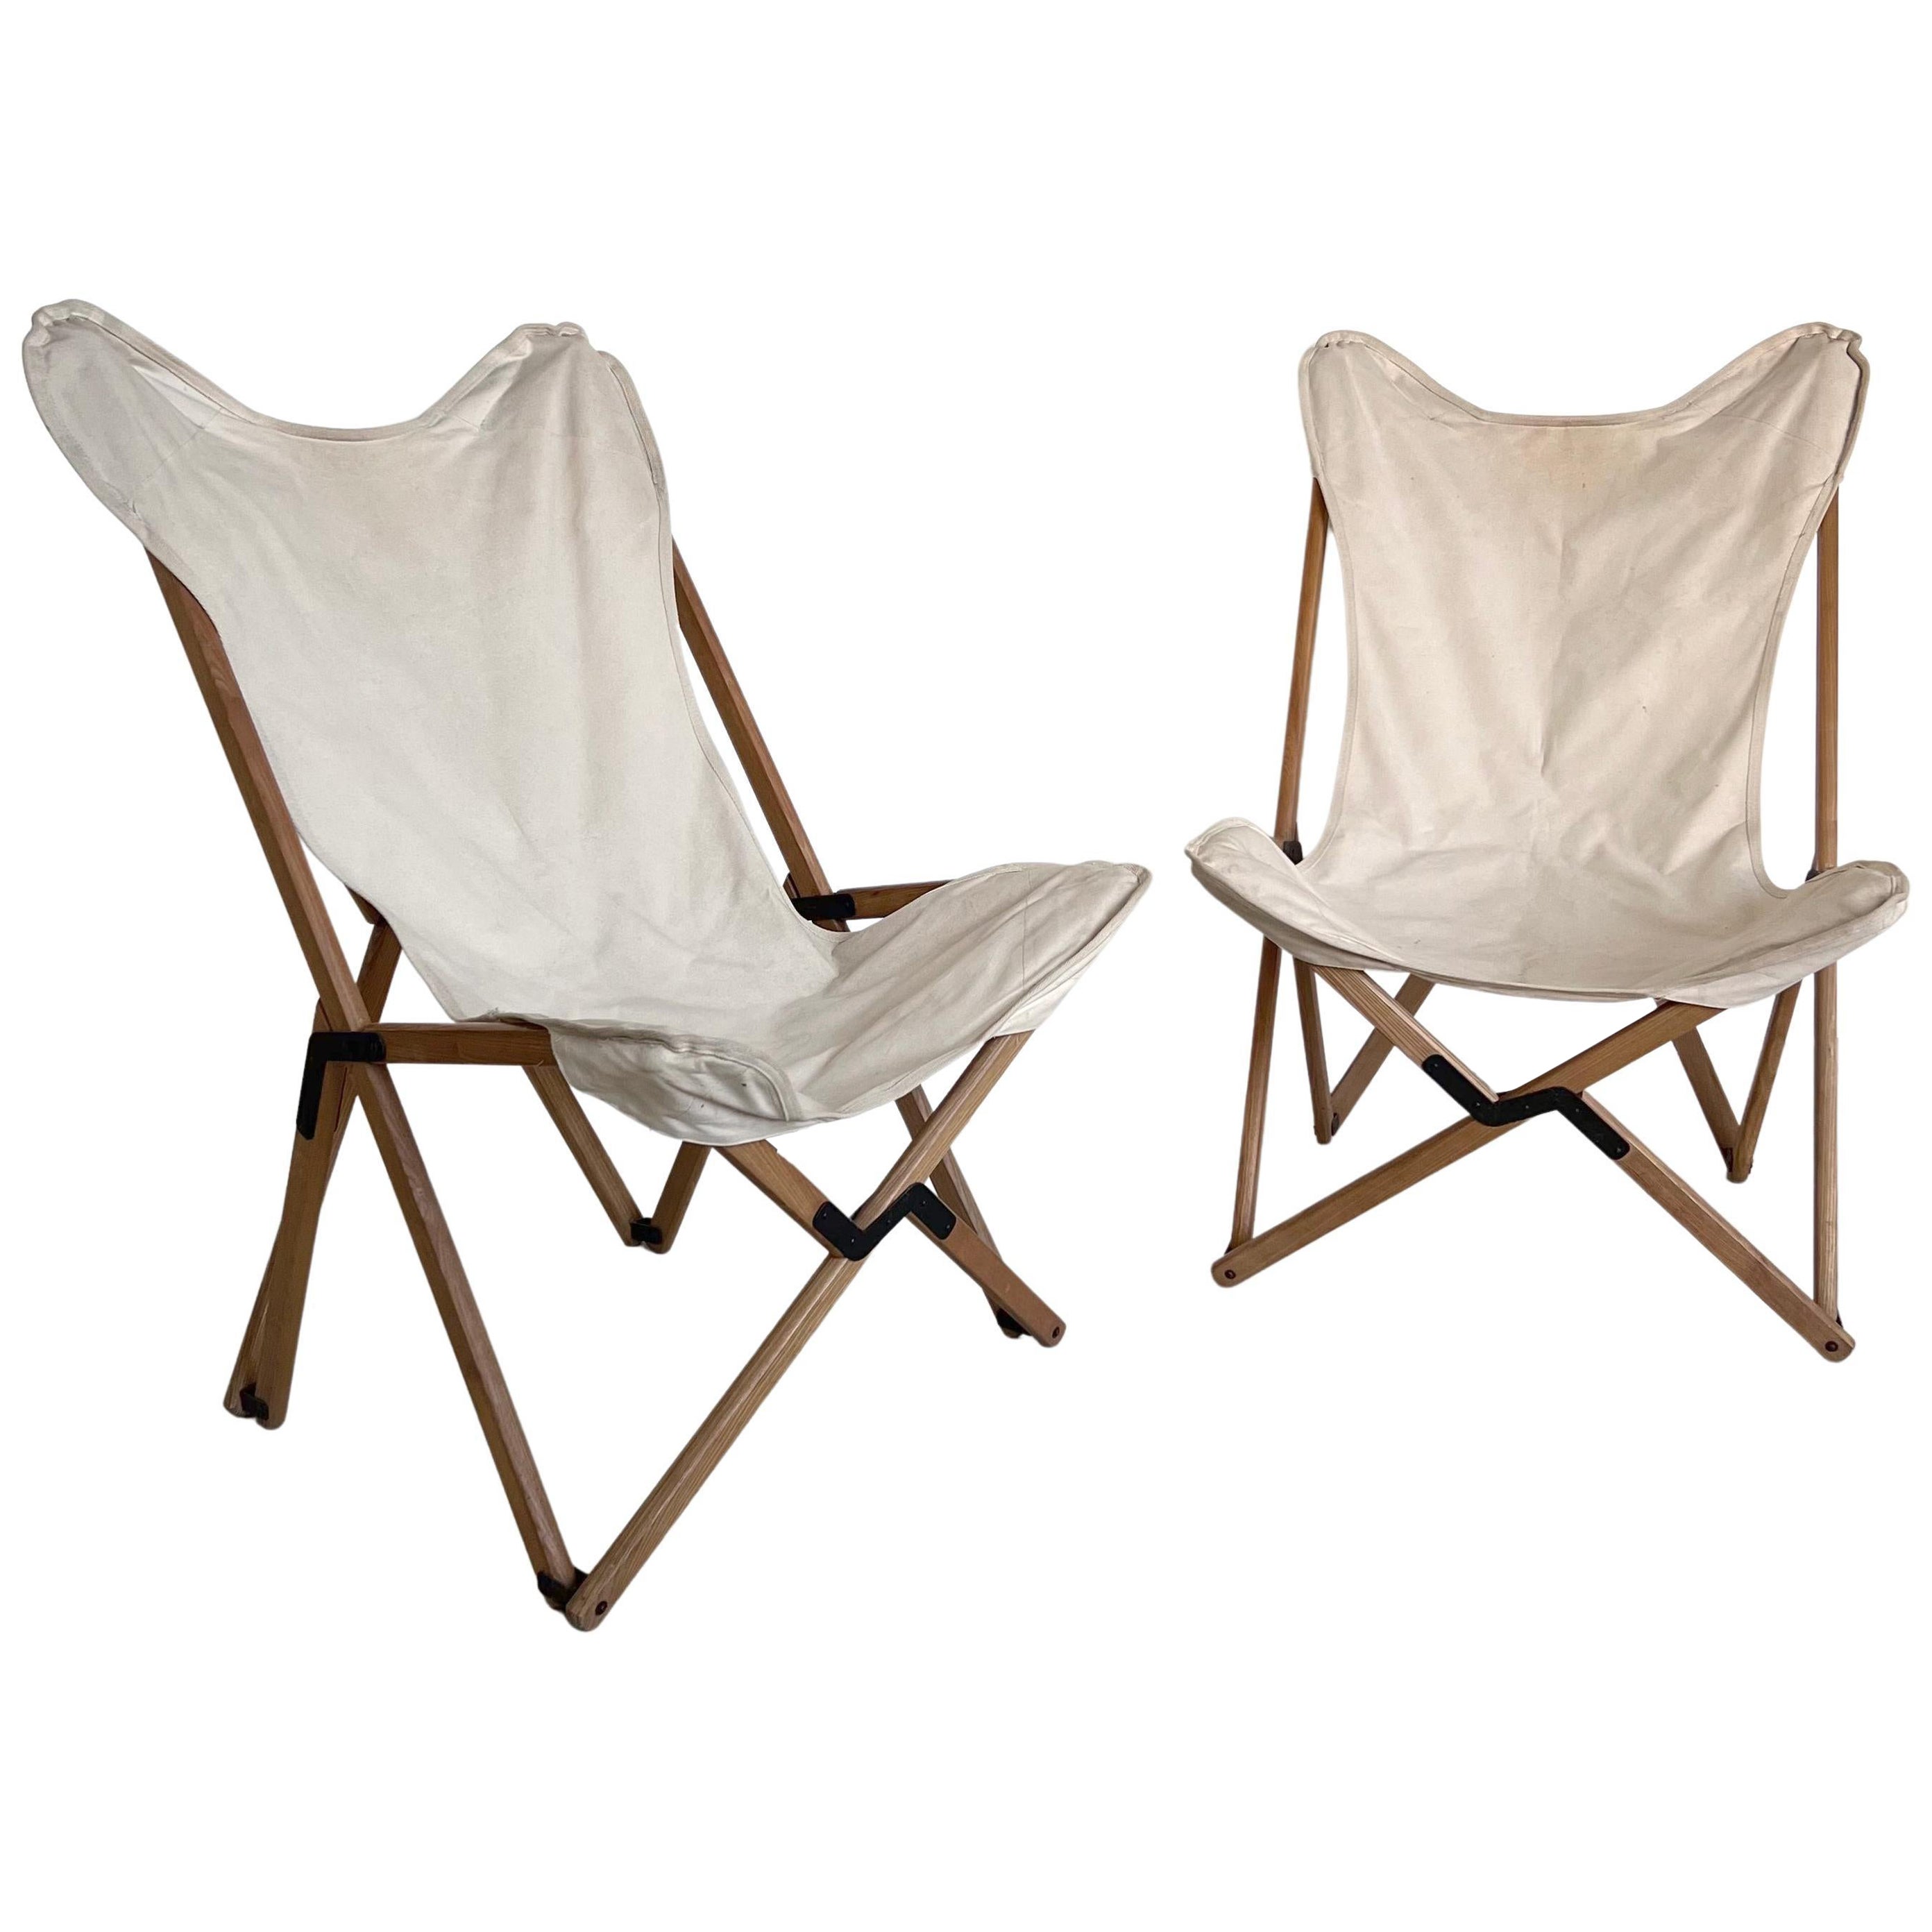 Vintage Foldable Garden / Outdoor Chairs in Wood and White Canvas Boho Chic For Sale